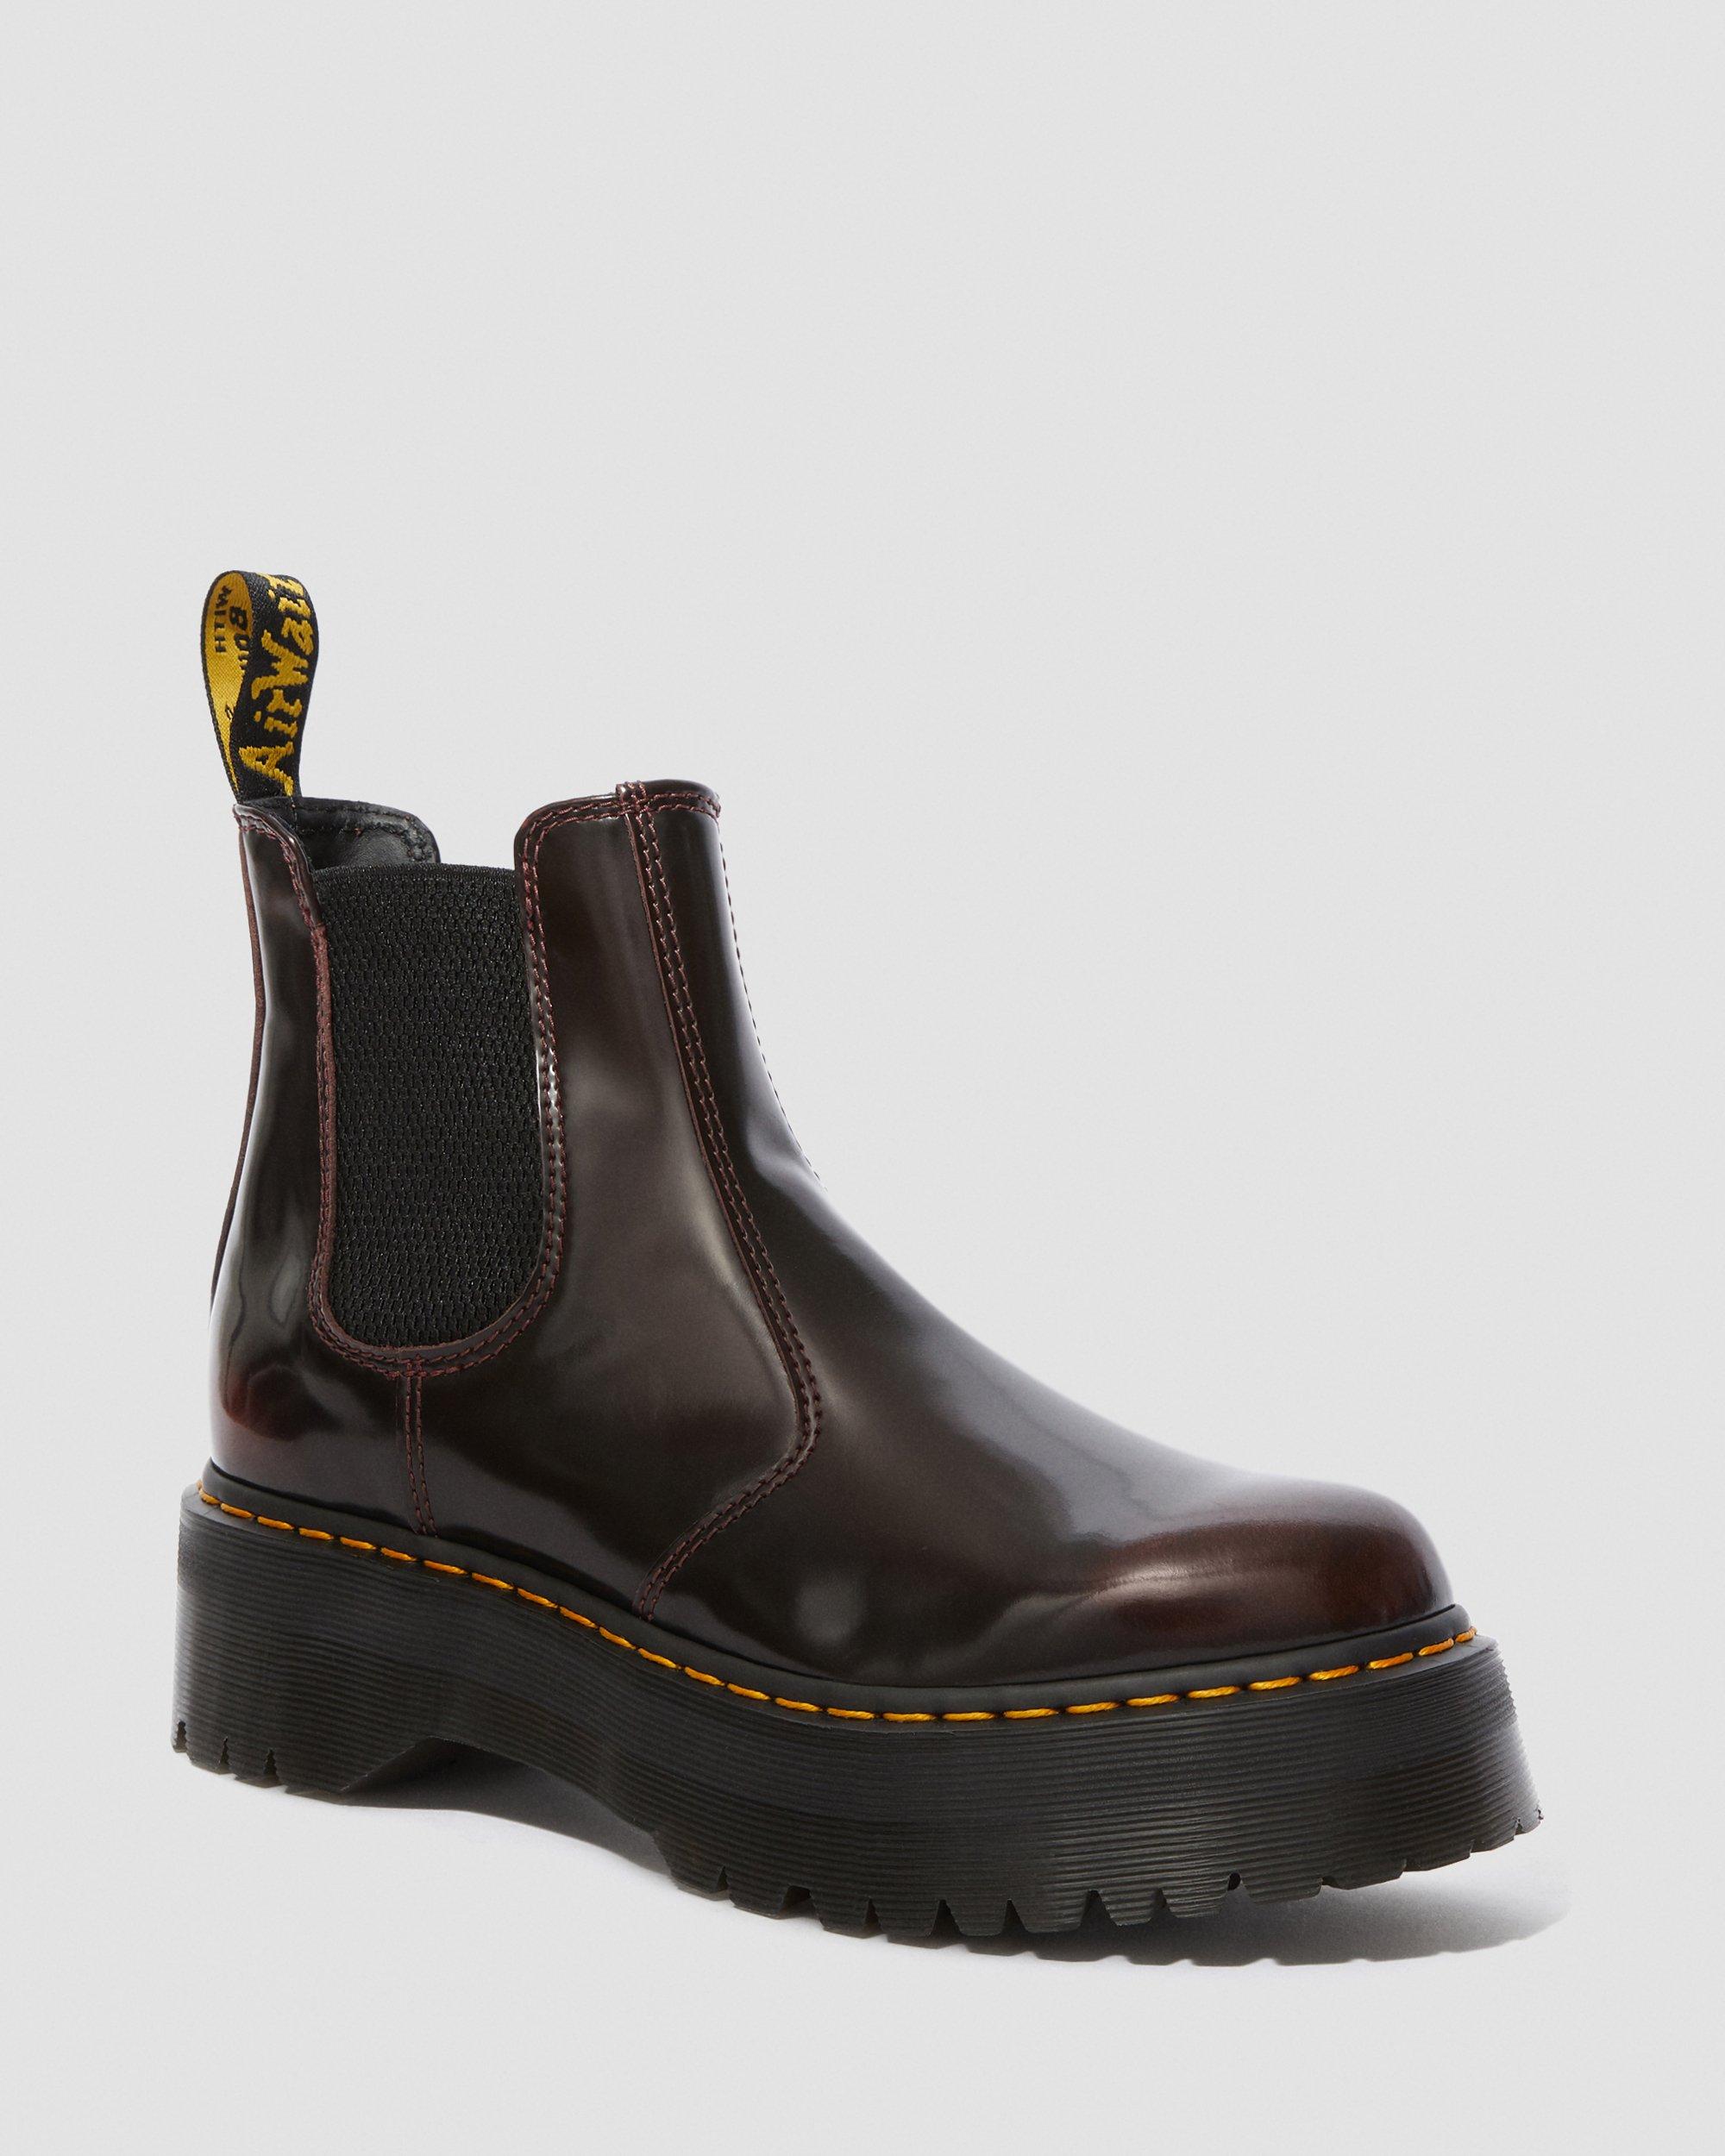 2976 Arcadia Platform Chelsea Boots in Cherry Red | Dr. Martens